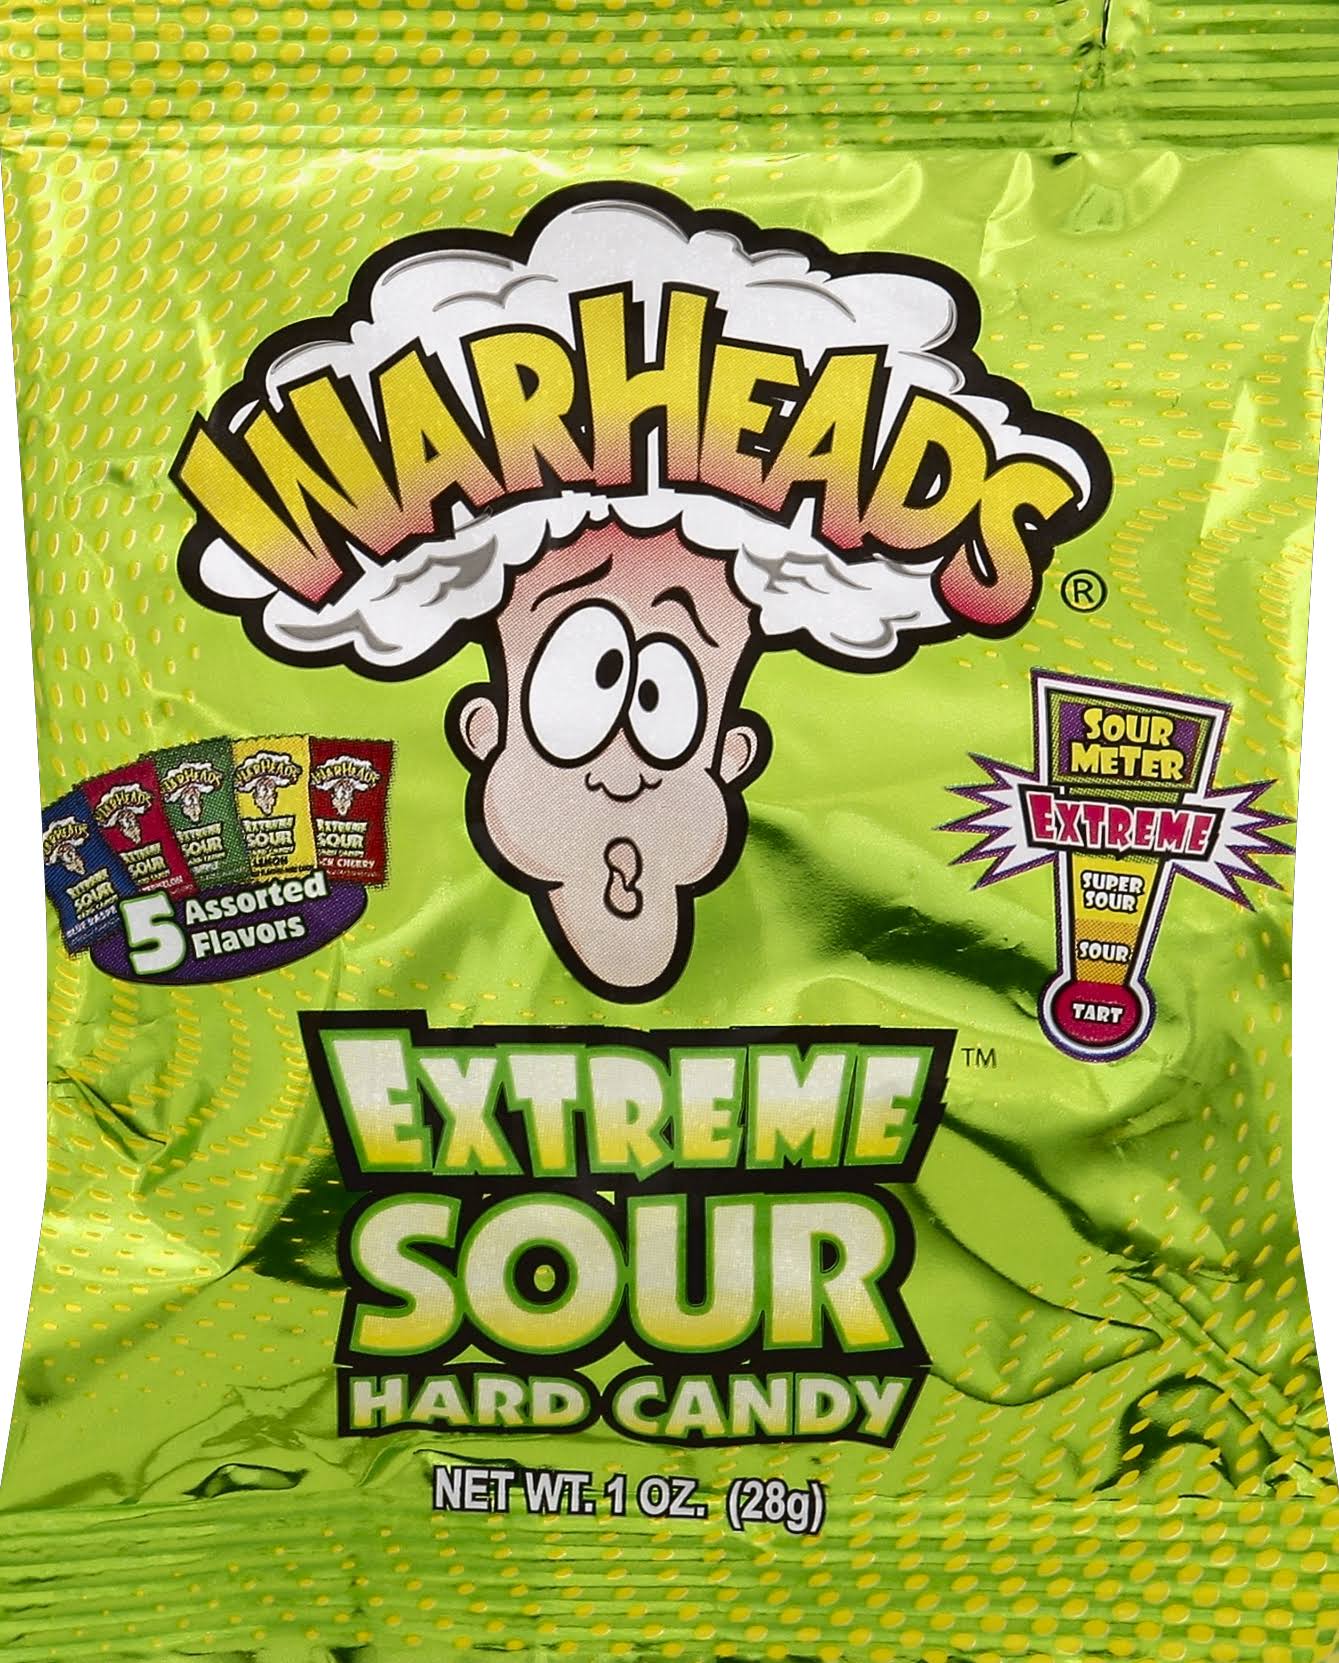 WarHeads Hard Candy, Extreme Sour, Assorted Flavors - 1 oz